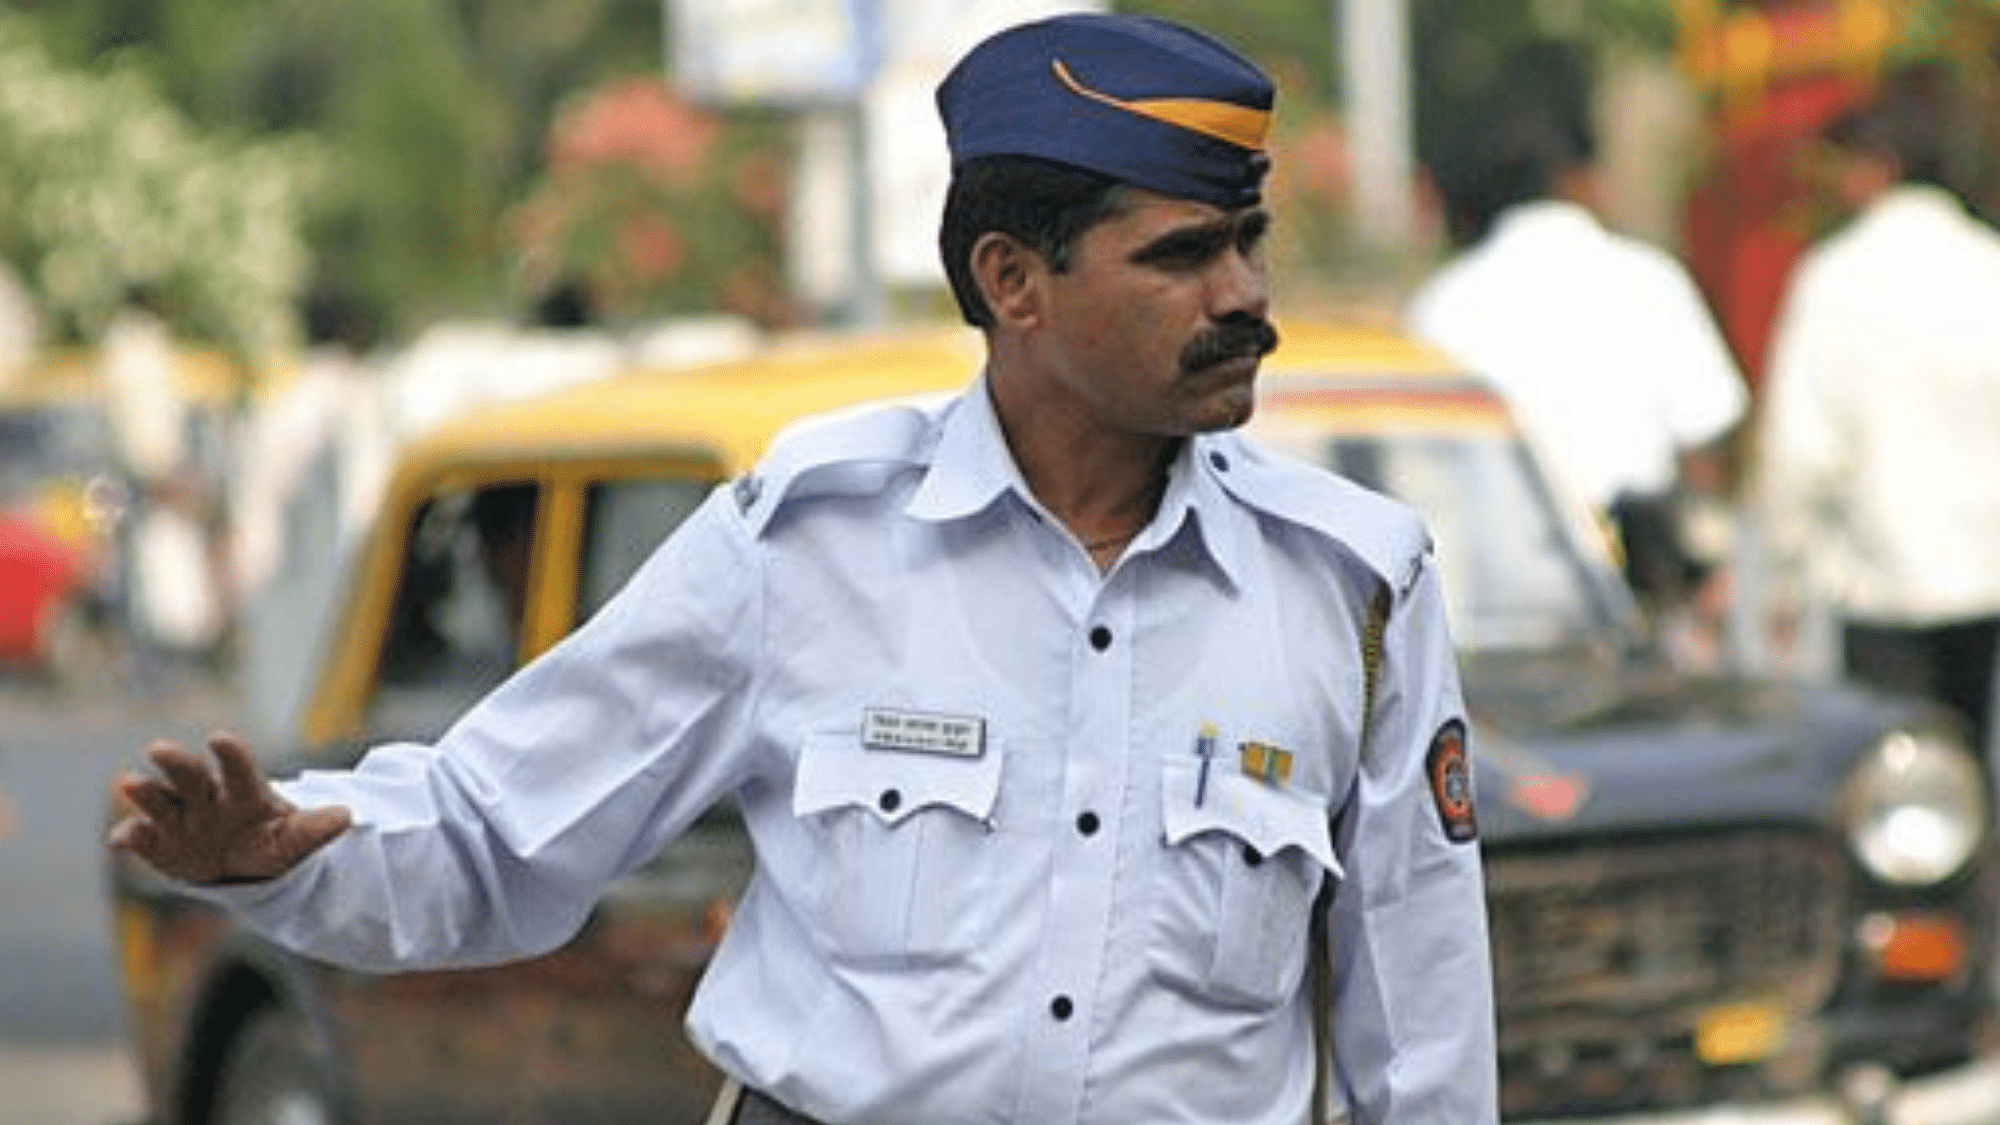 <div class="paragraphs"><p>Representational Image. Man kidnaps traffic police officer after being stopped for checking.</p></div>